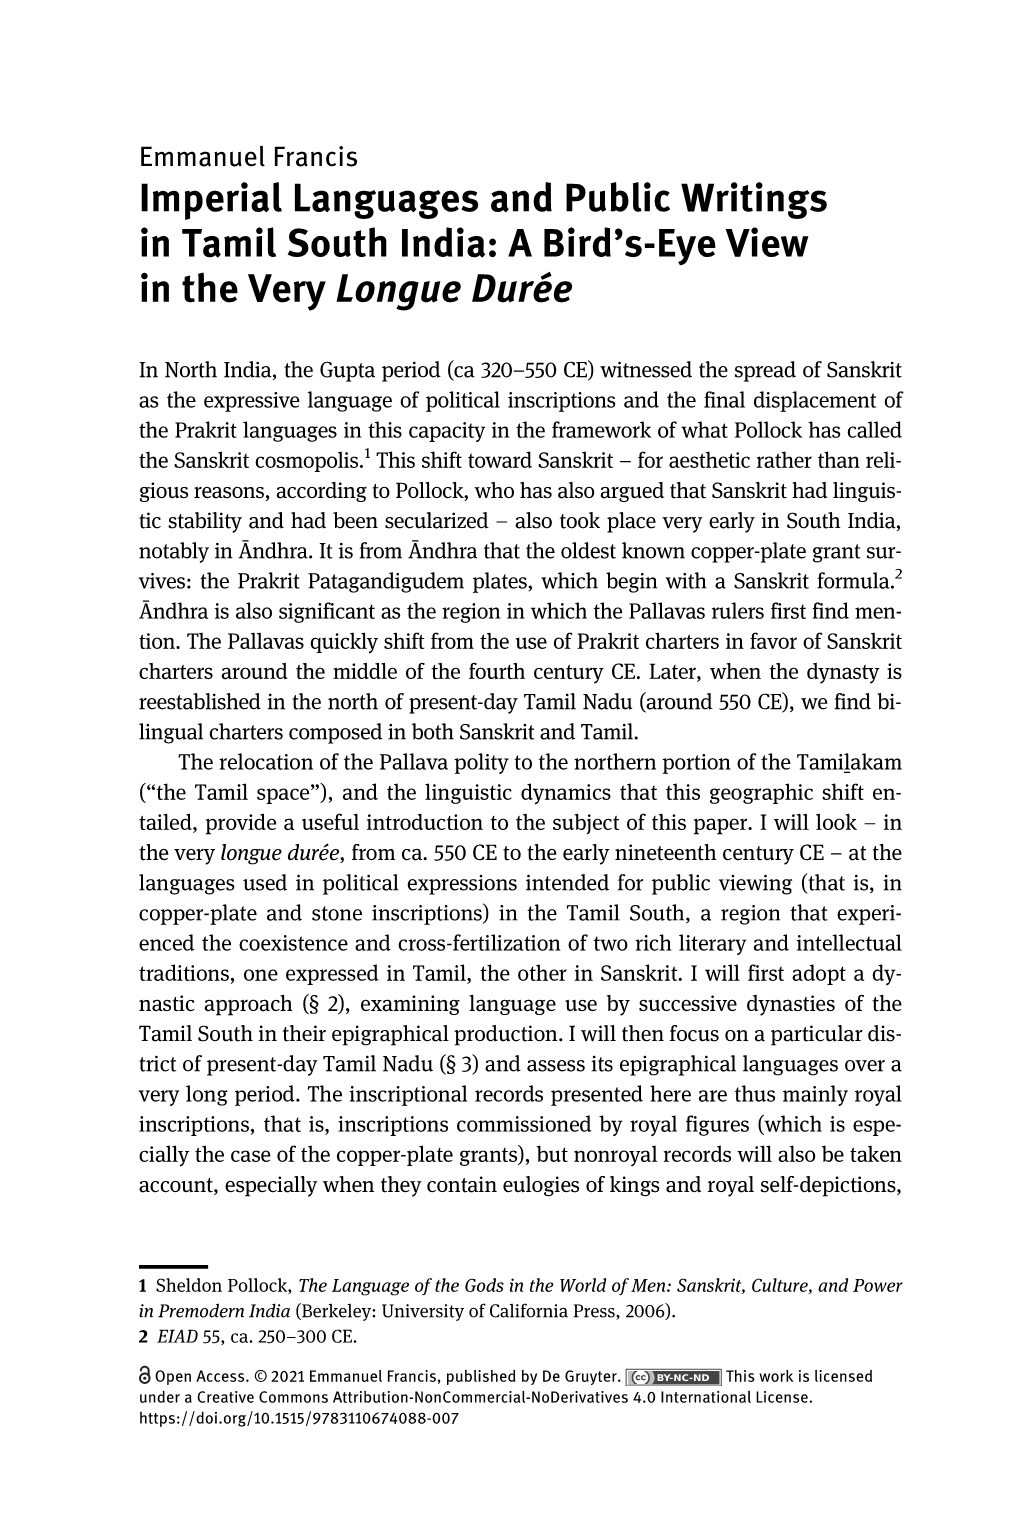 Imperial Languages and Public Writings in Tamil South India: a Bird’S-Eye View in the Very Longue Durée